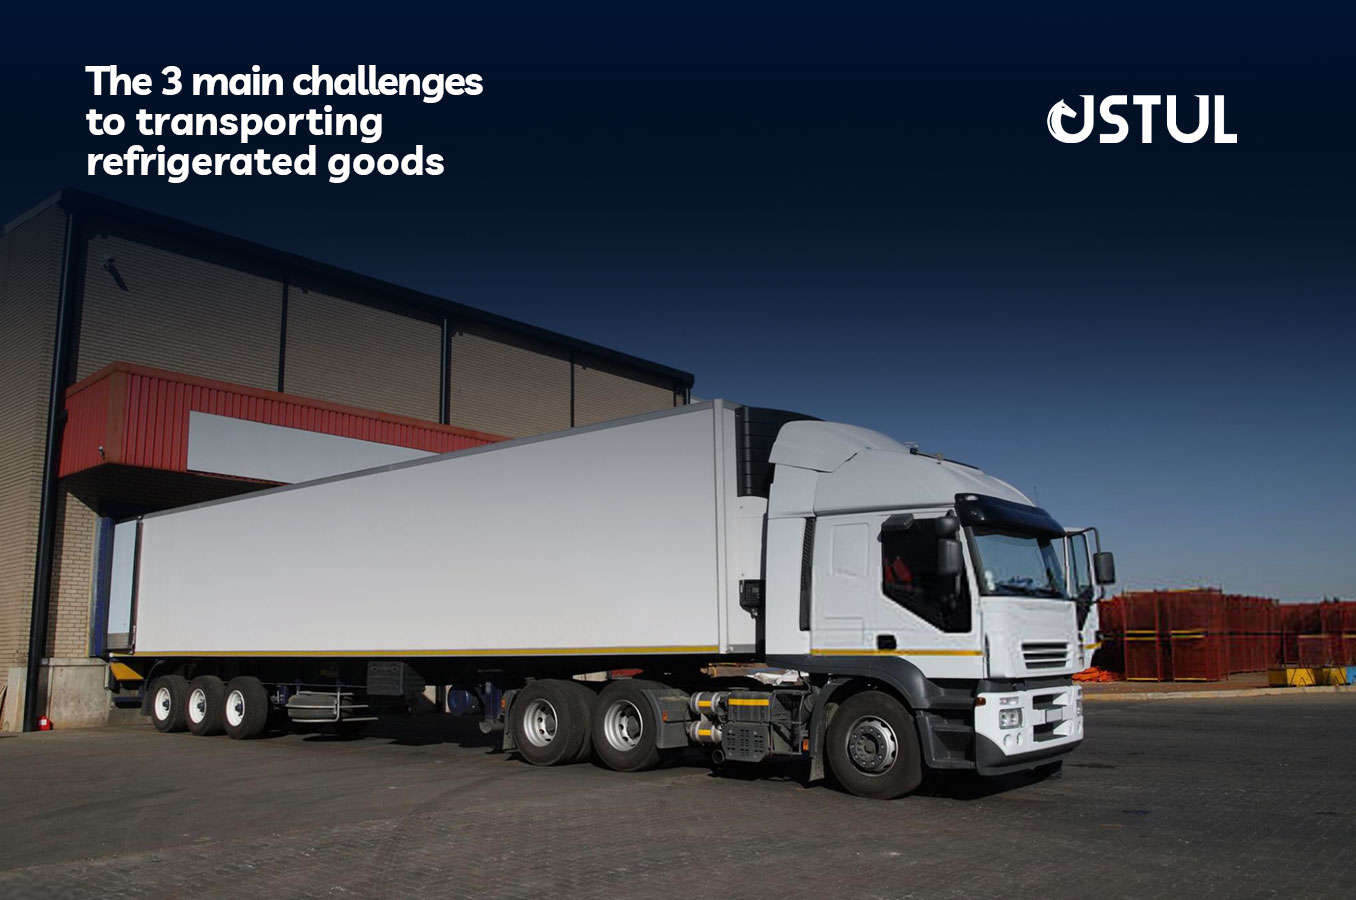 The 3 Main Challenges to refrigerated goods transportation